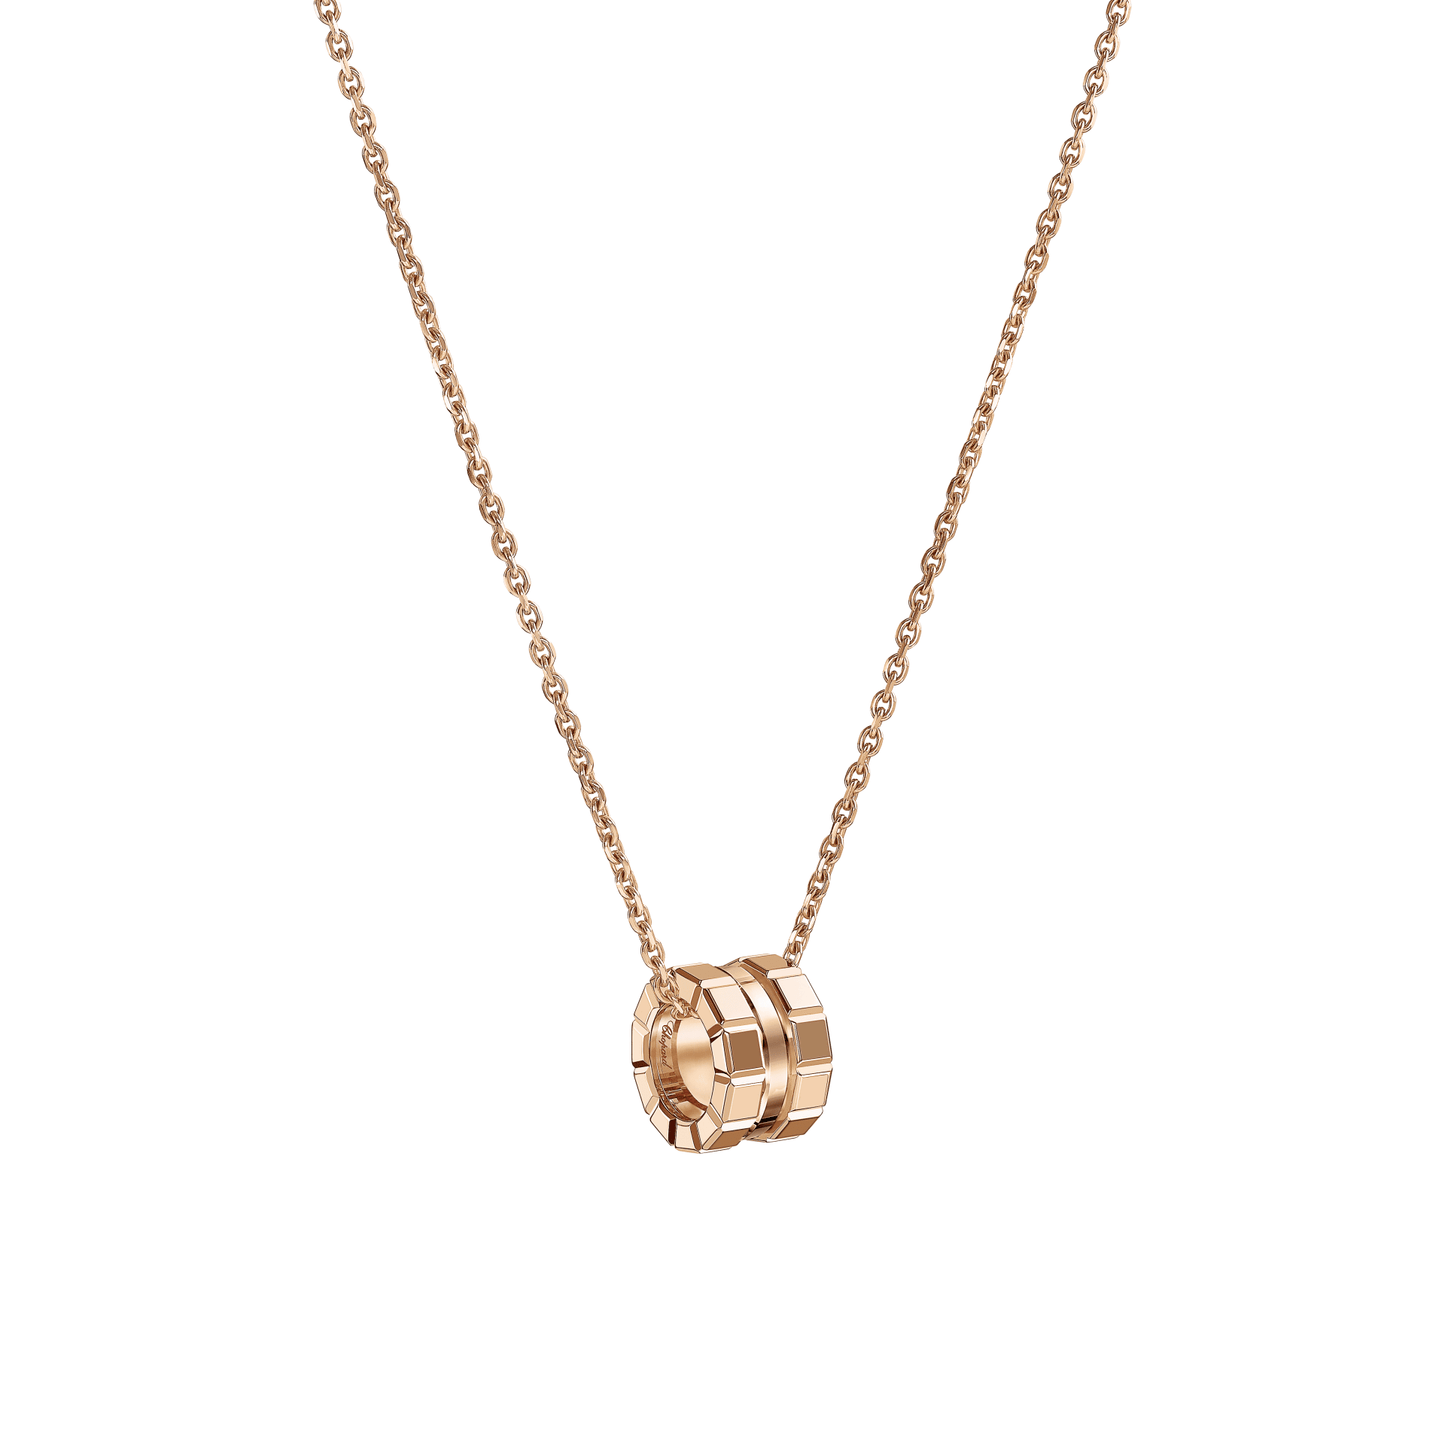 ICE CUBE PENDANT, ETHICAL ROSE GOLD 797004-5001